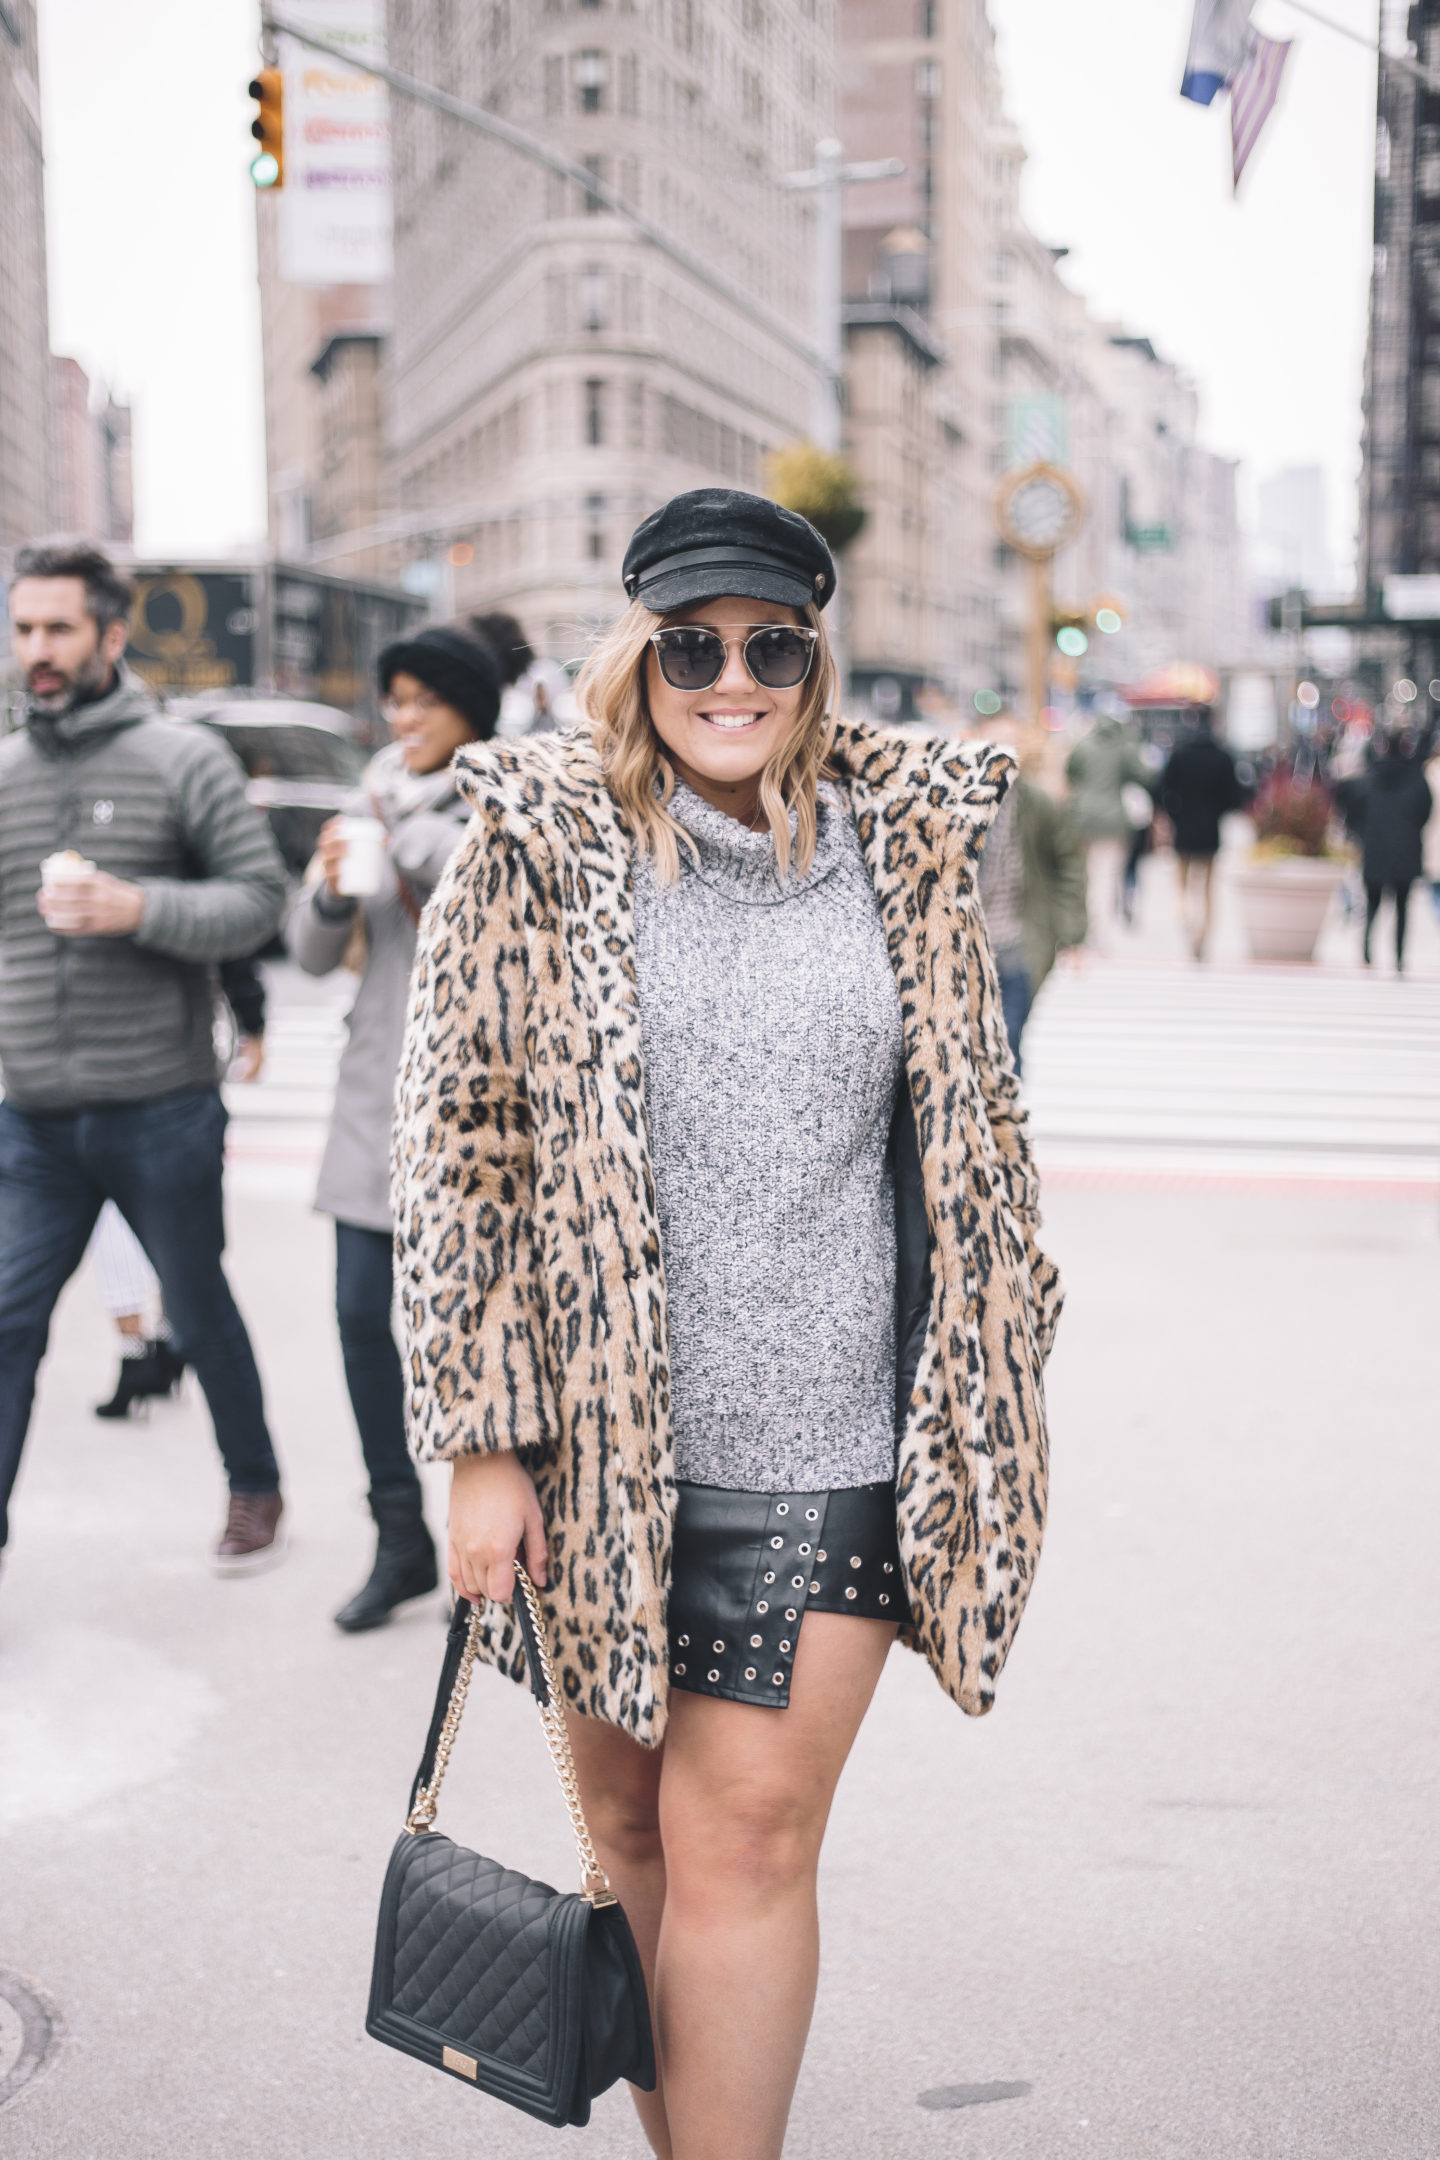 Monochrome Outfit + A Pop Of Leopard at NYFW